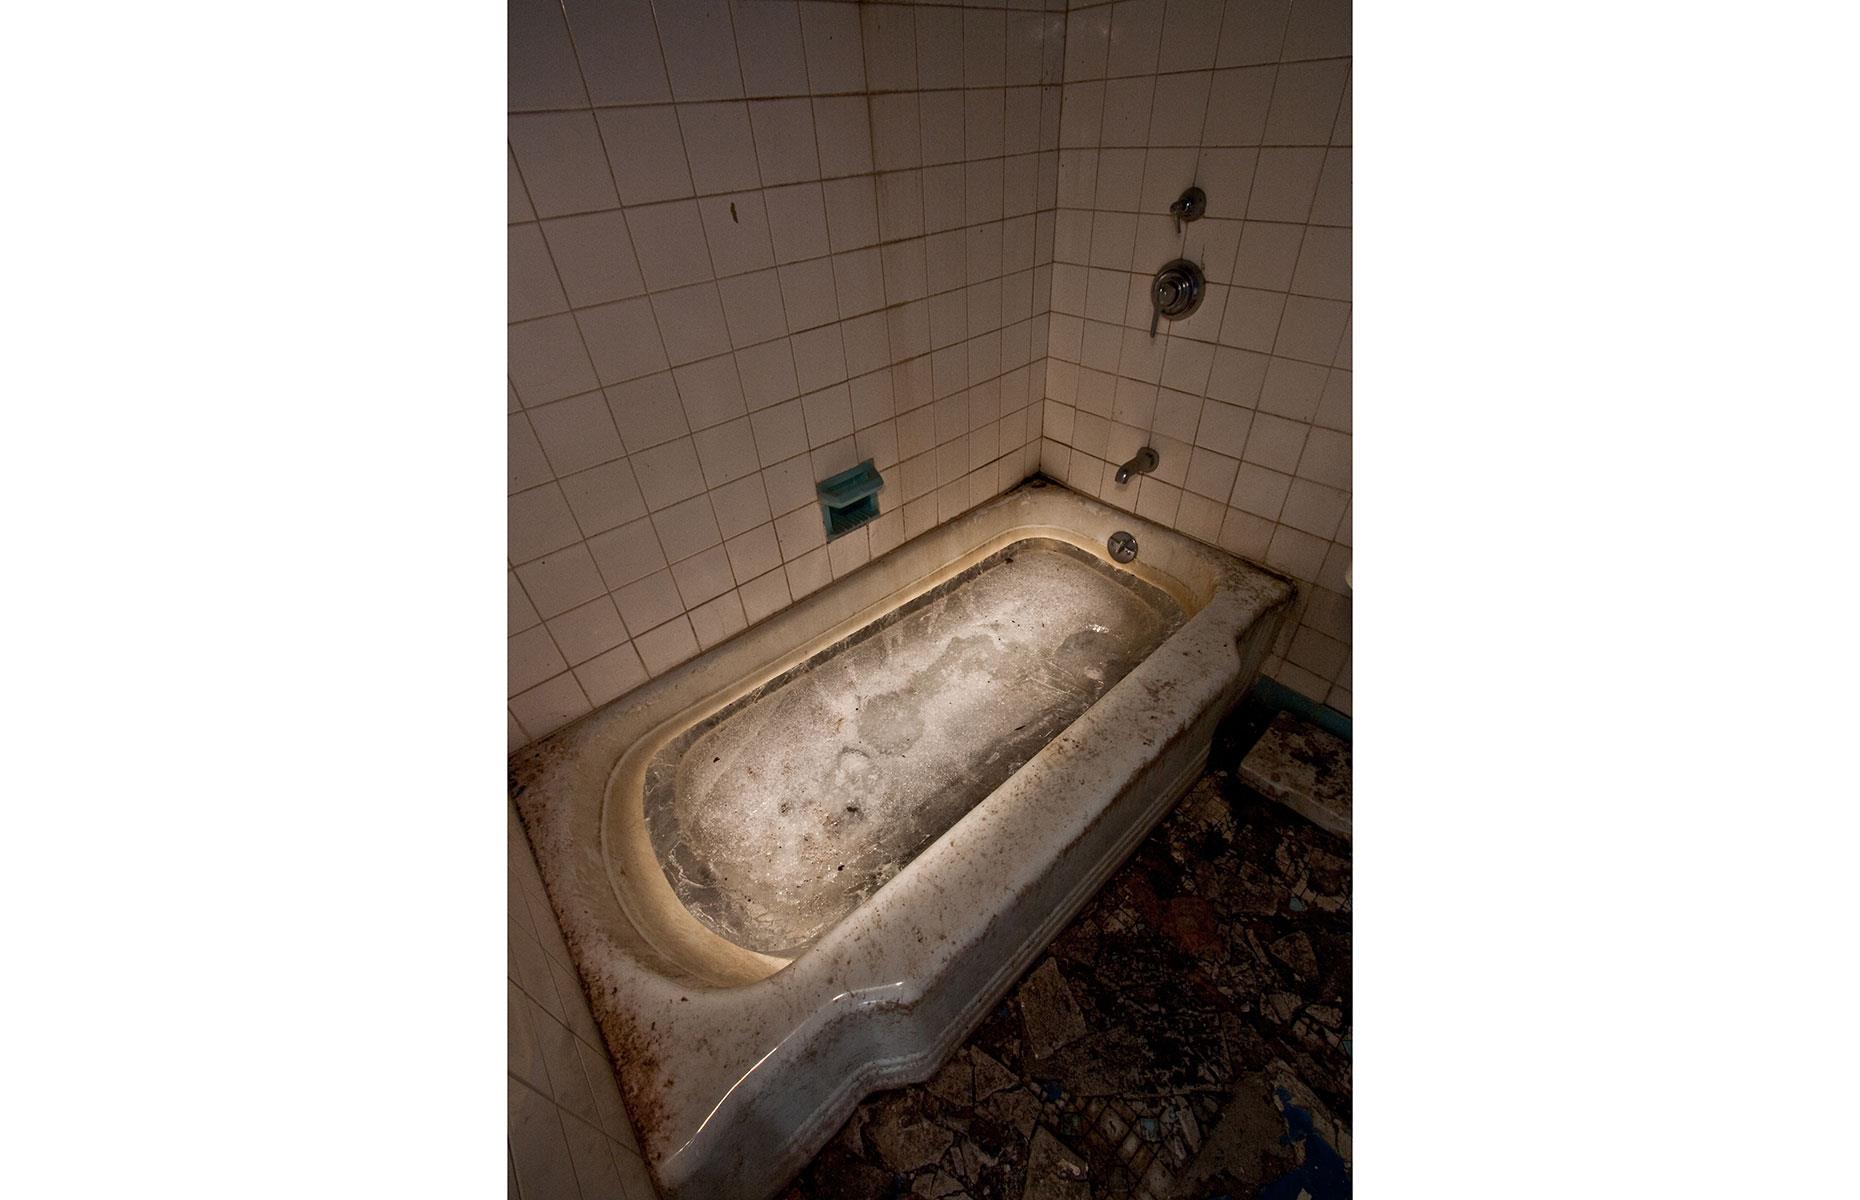 Slide 7 of 70: The hotel closed in 1986 after Grossinger's descendants sold it and has been empty ever since. Inside many features such as this bathroom and the indoor pool are still broadly intact.